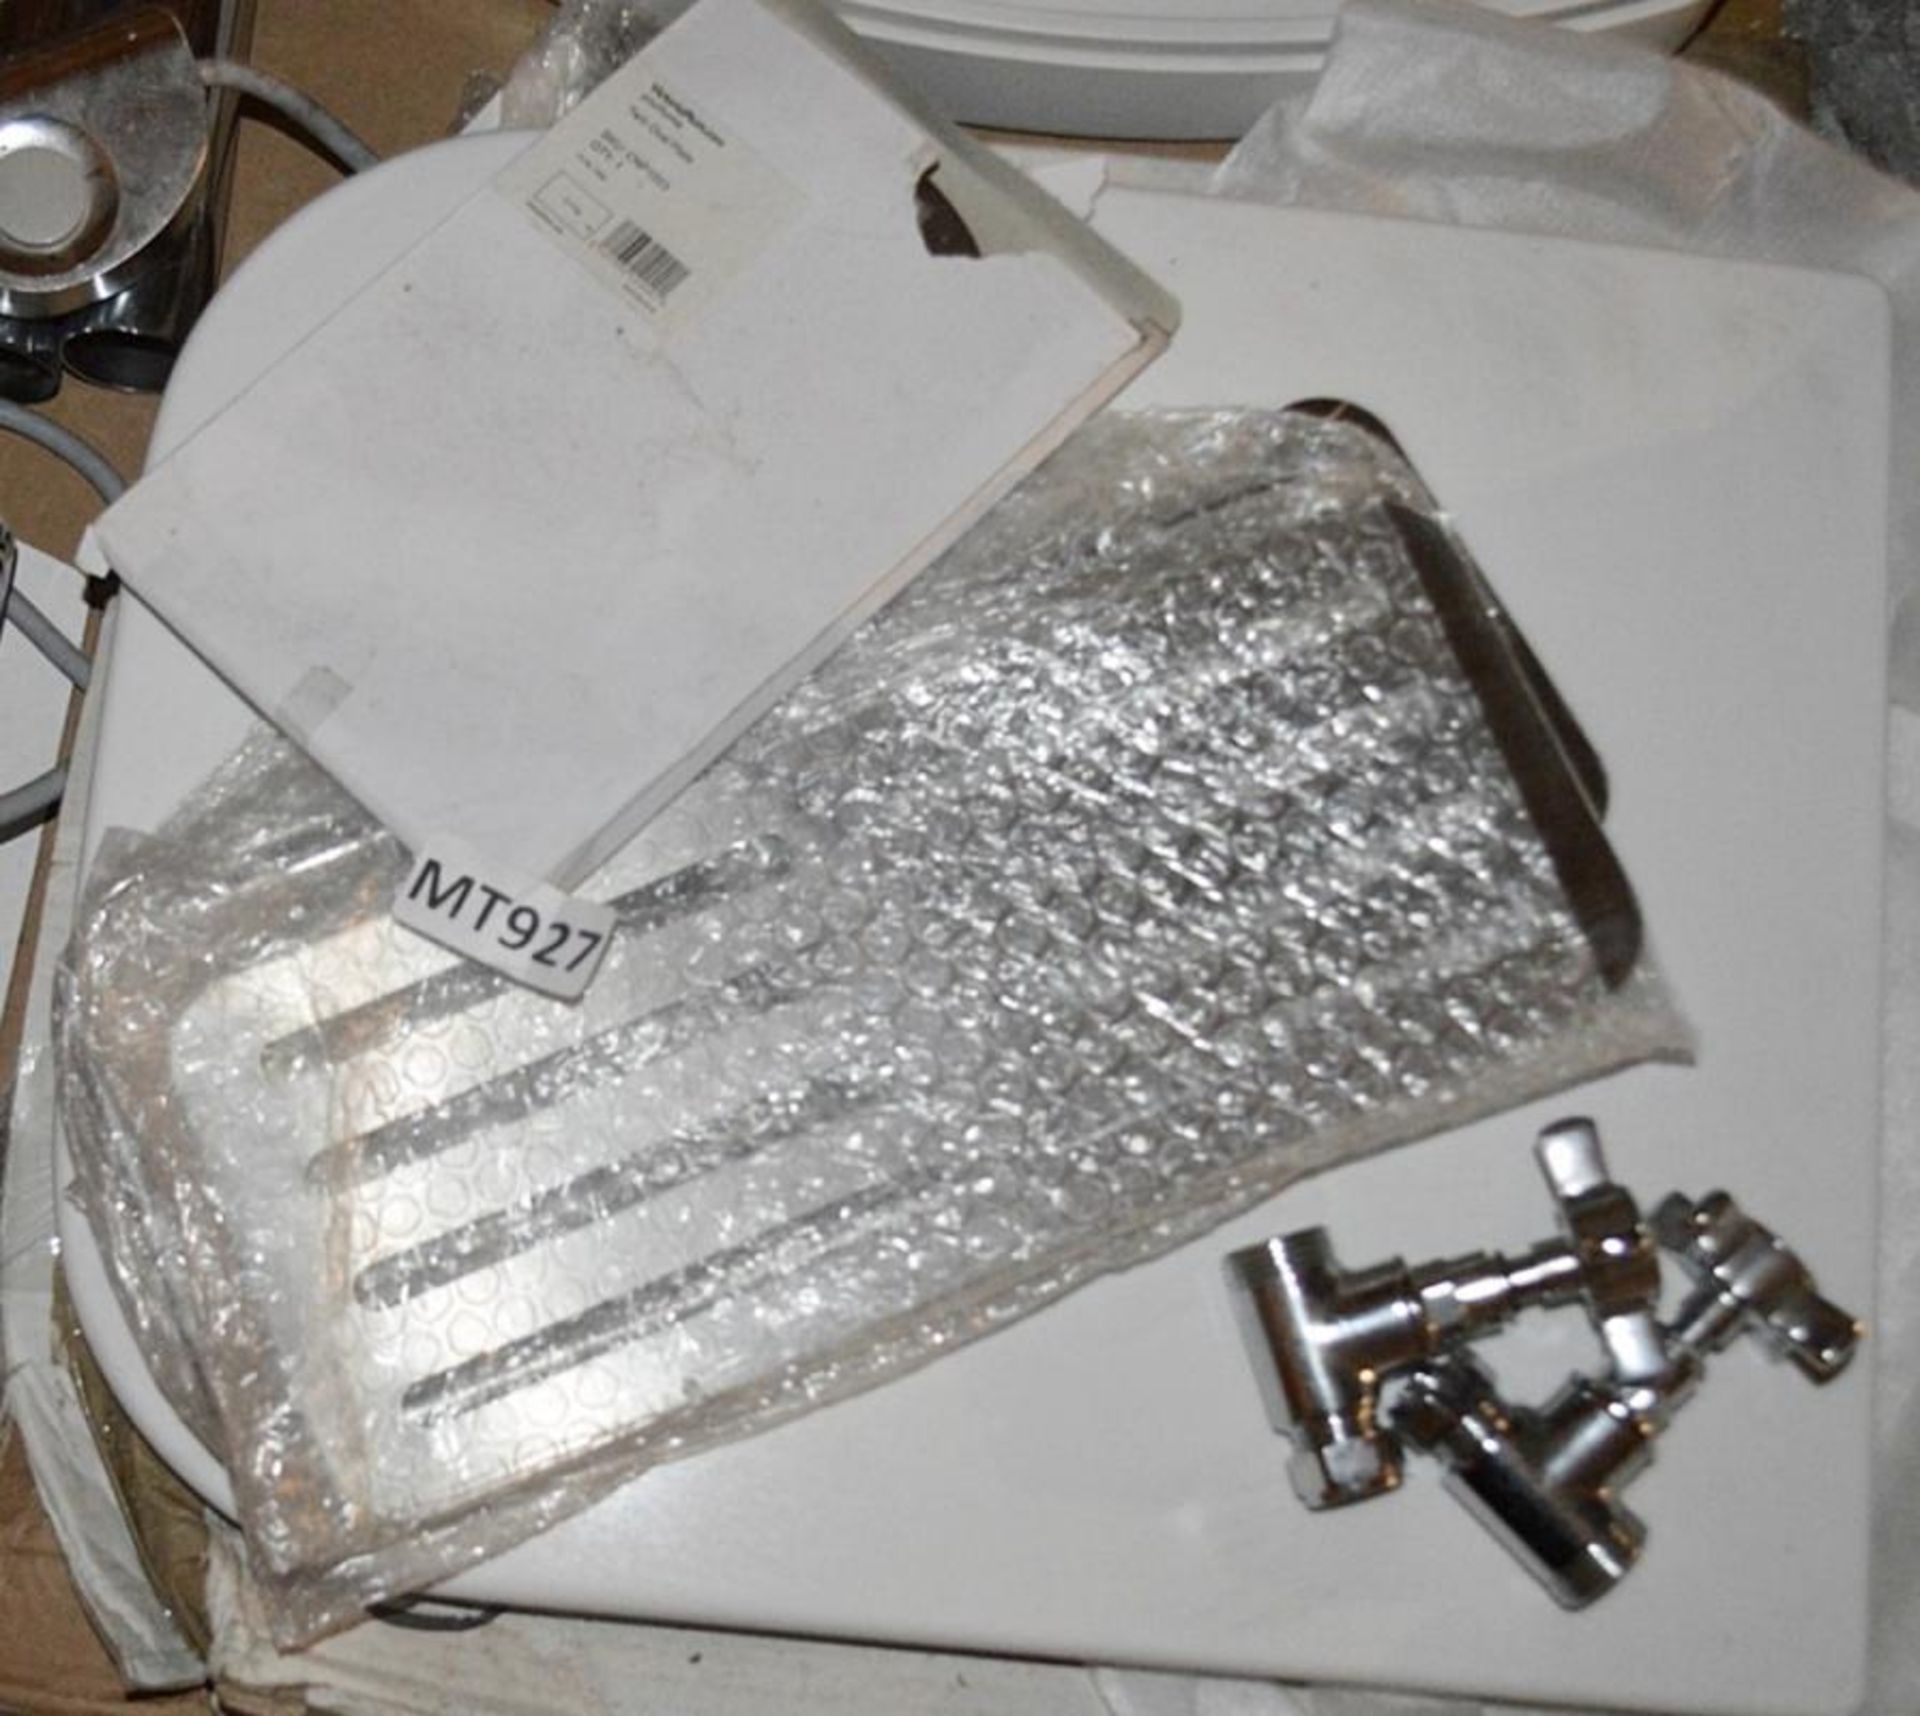 Approx 15 x Assorted Items Of Bathroom Brassware And Accessories - Brand New Boxed Stock - CL269 - L - Image 2 of 11